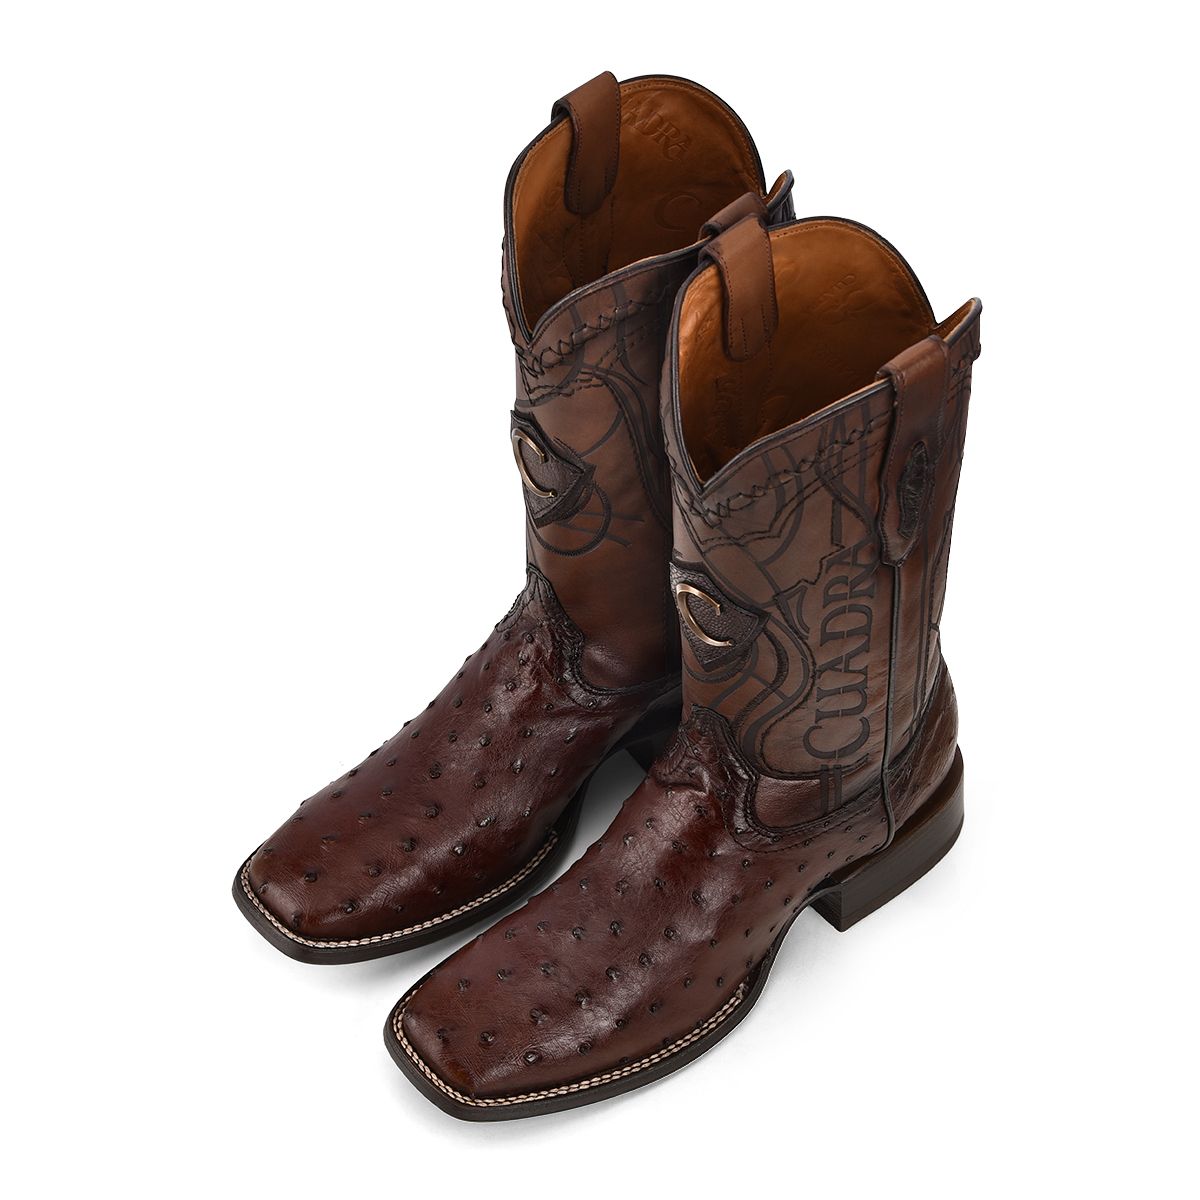 3Z1OA1 - Cuadra chocolate cowboy rodeo ostrich leather boots for men-Kuet.us